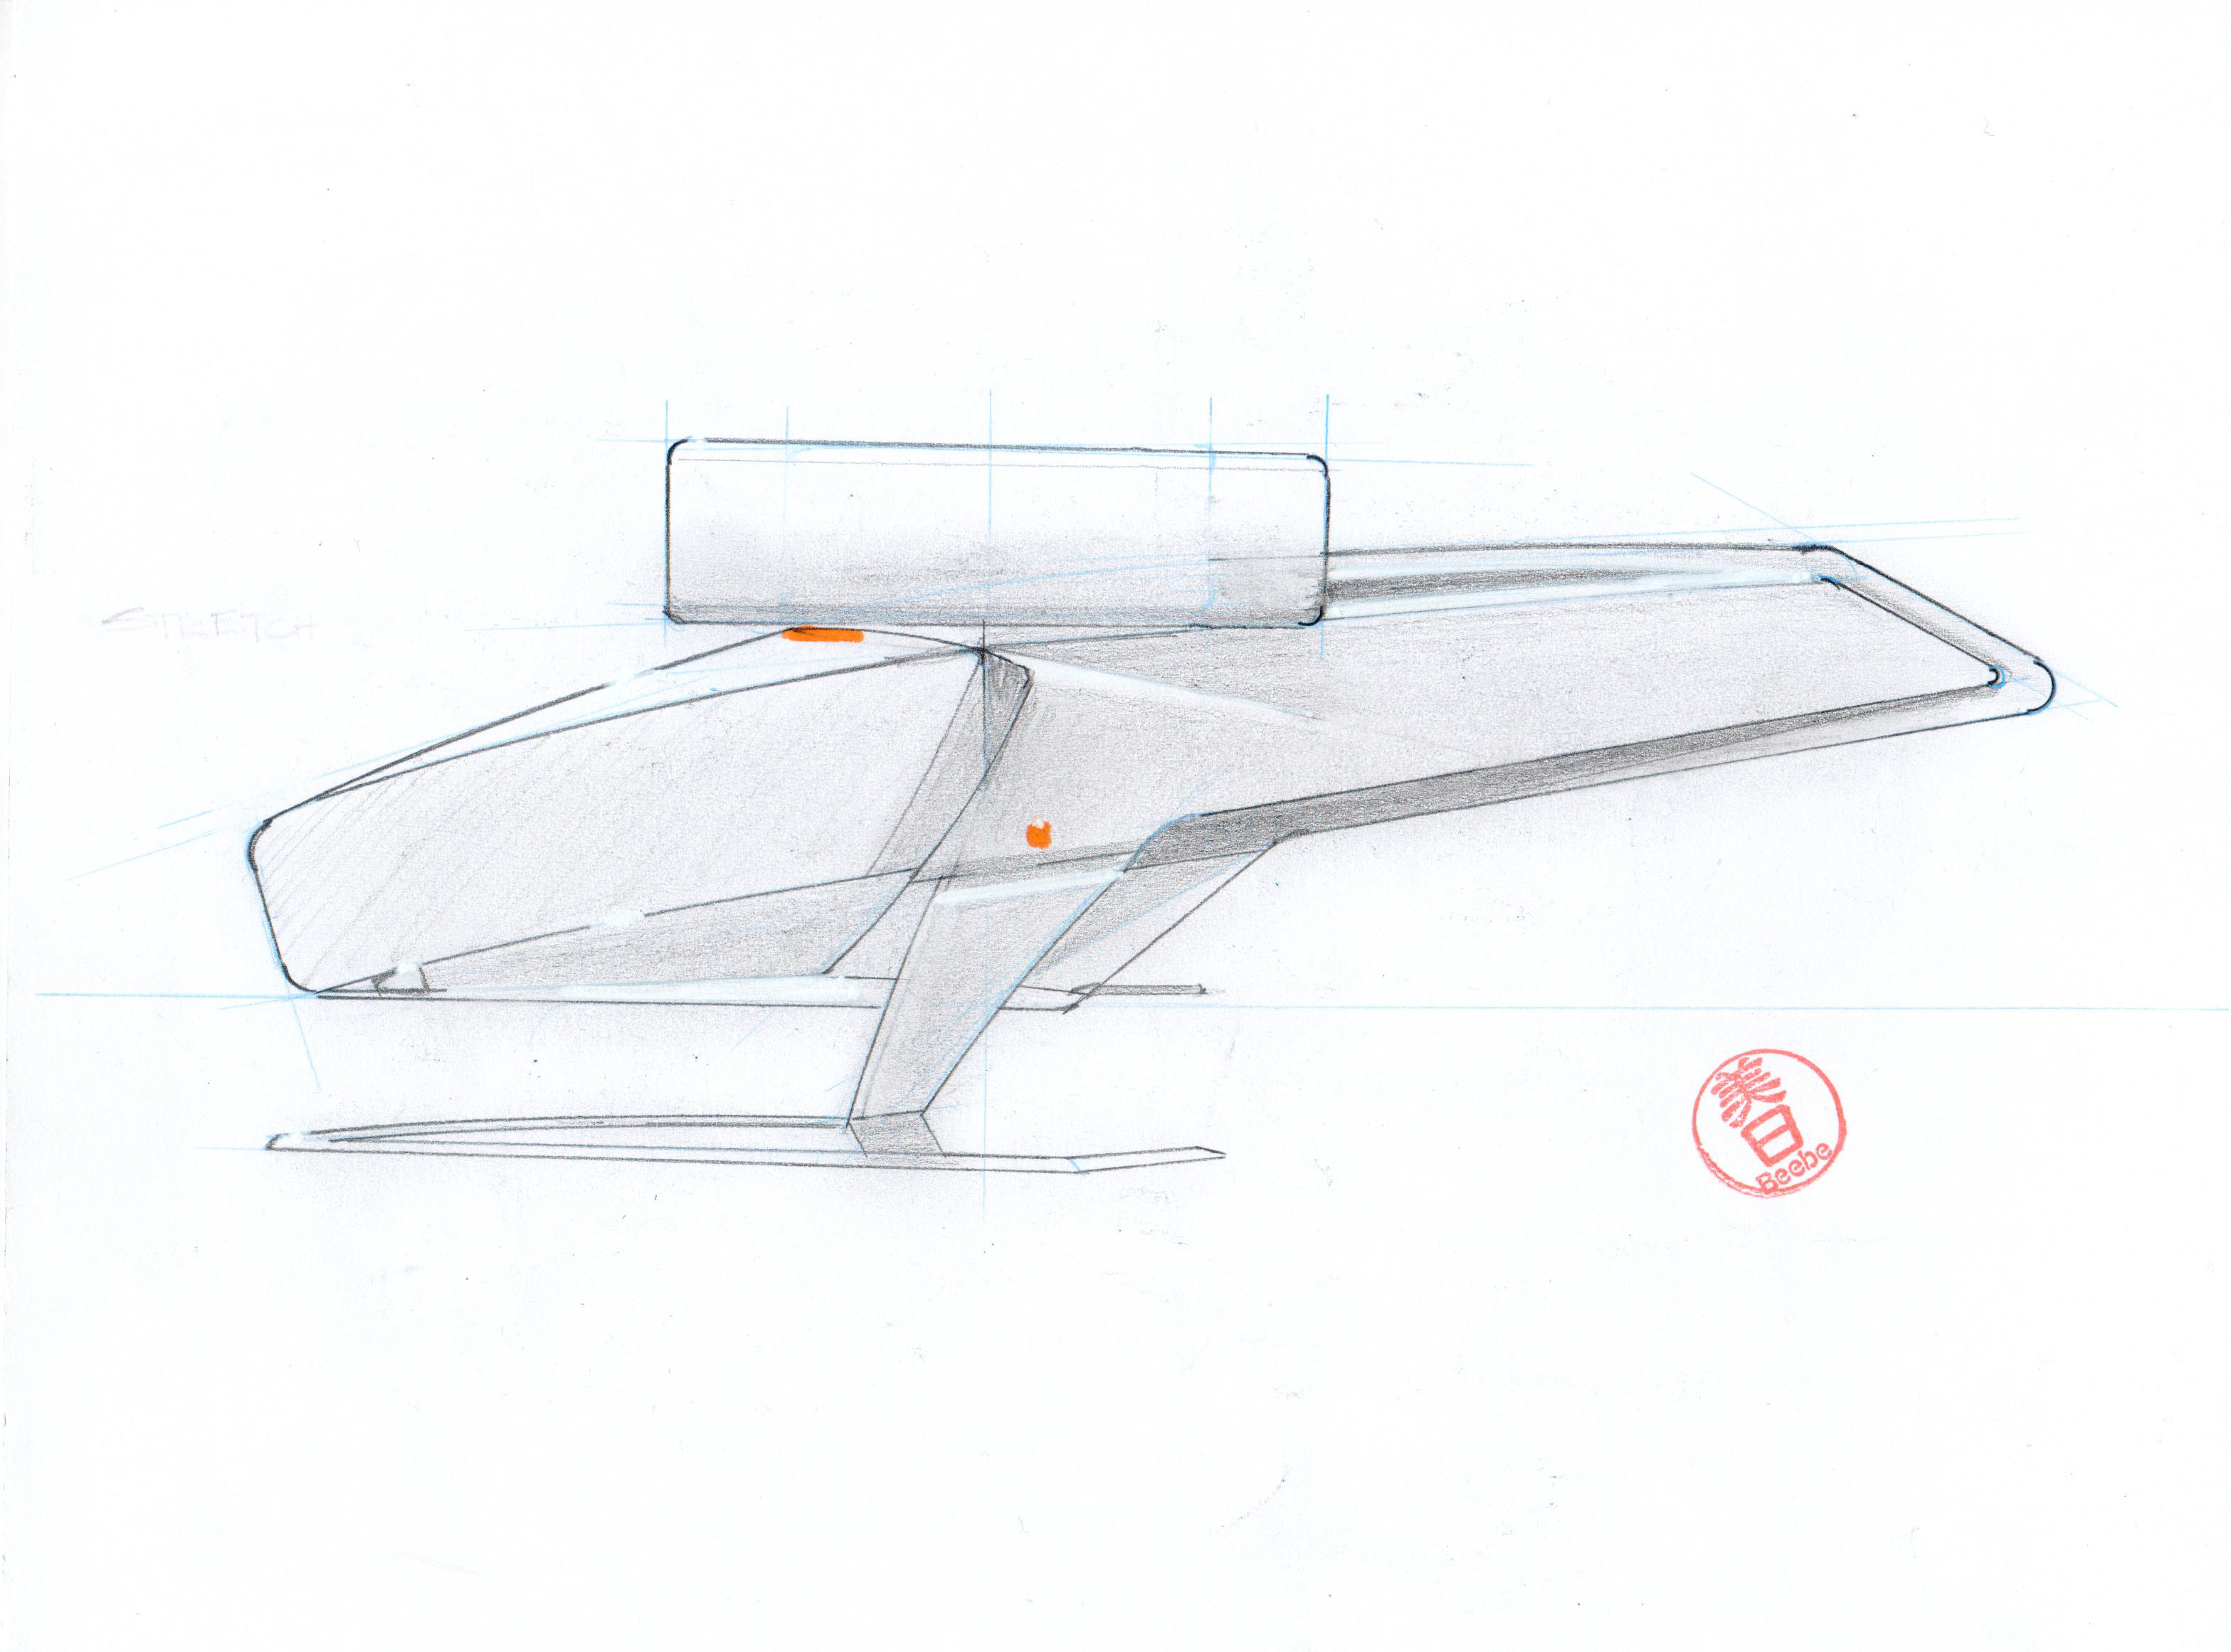 Initial drone concept done in pencil.